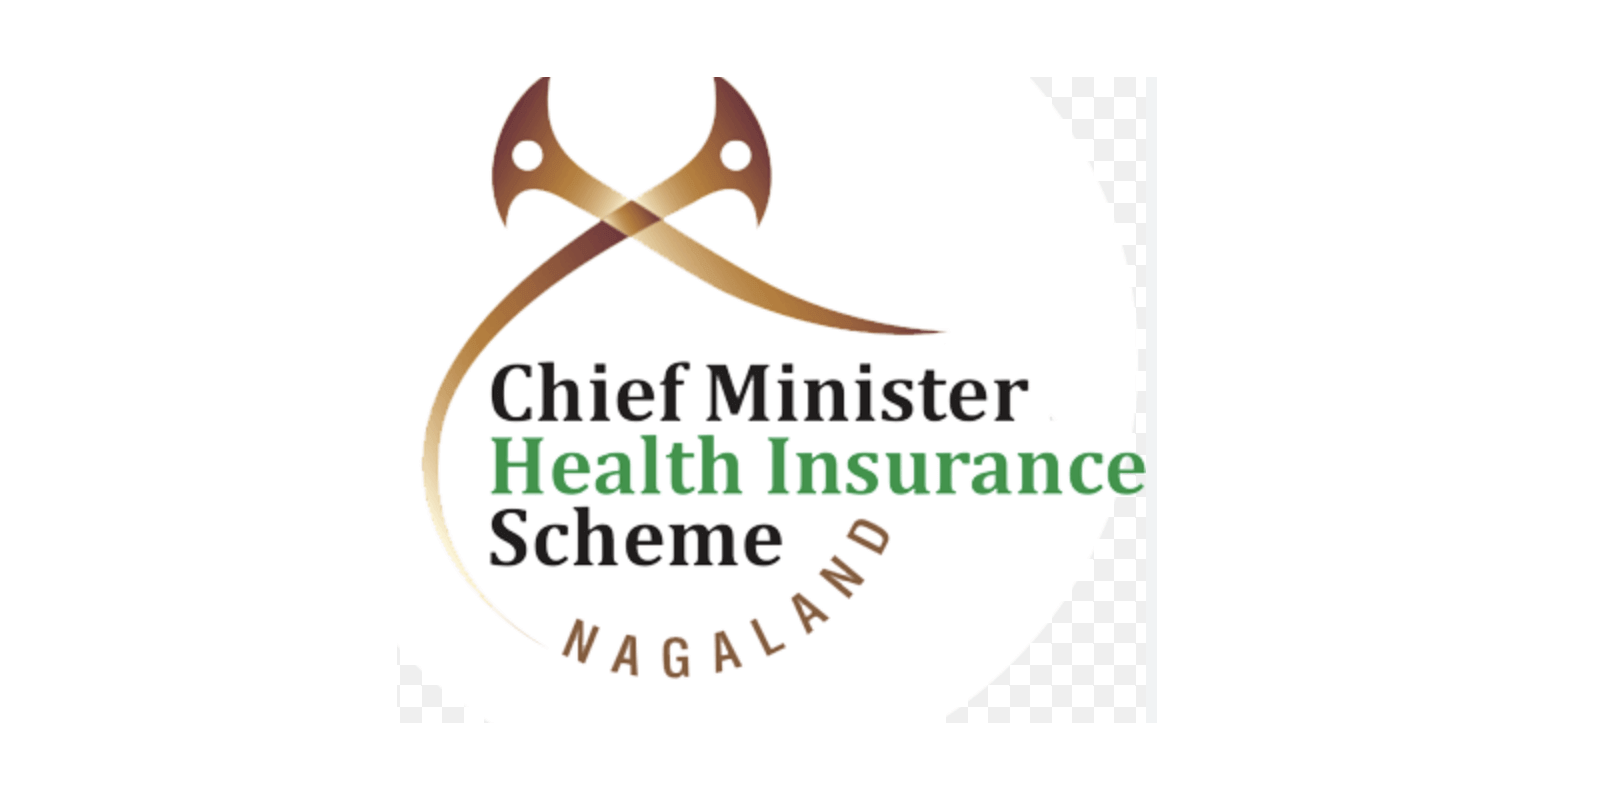 cmhis-chief-minister-health-insurance-scheme-nagaland